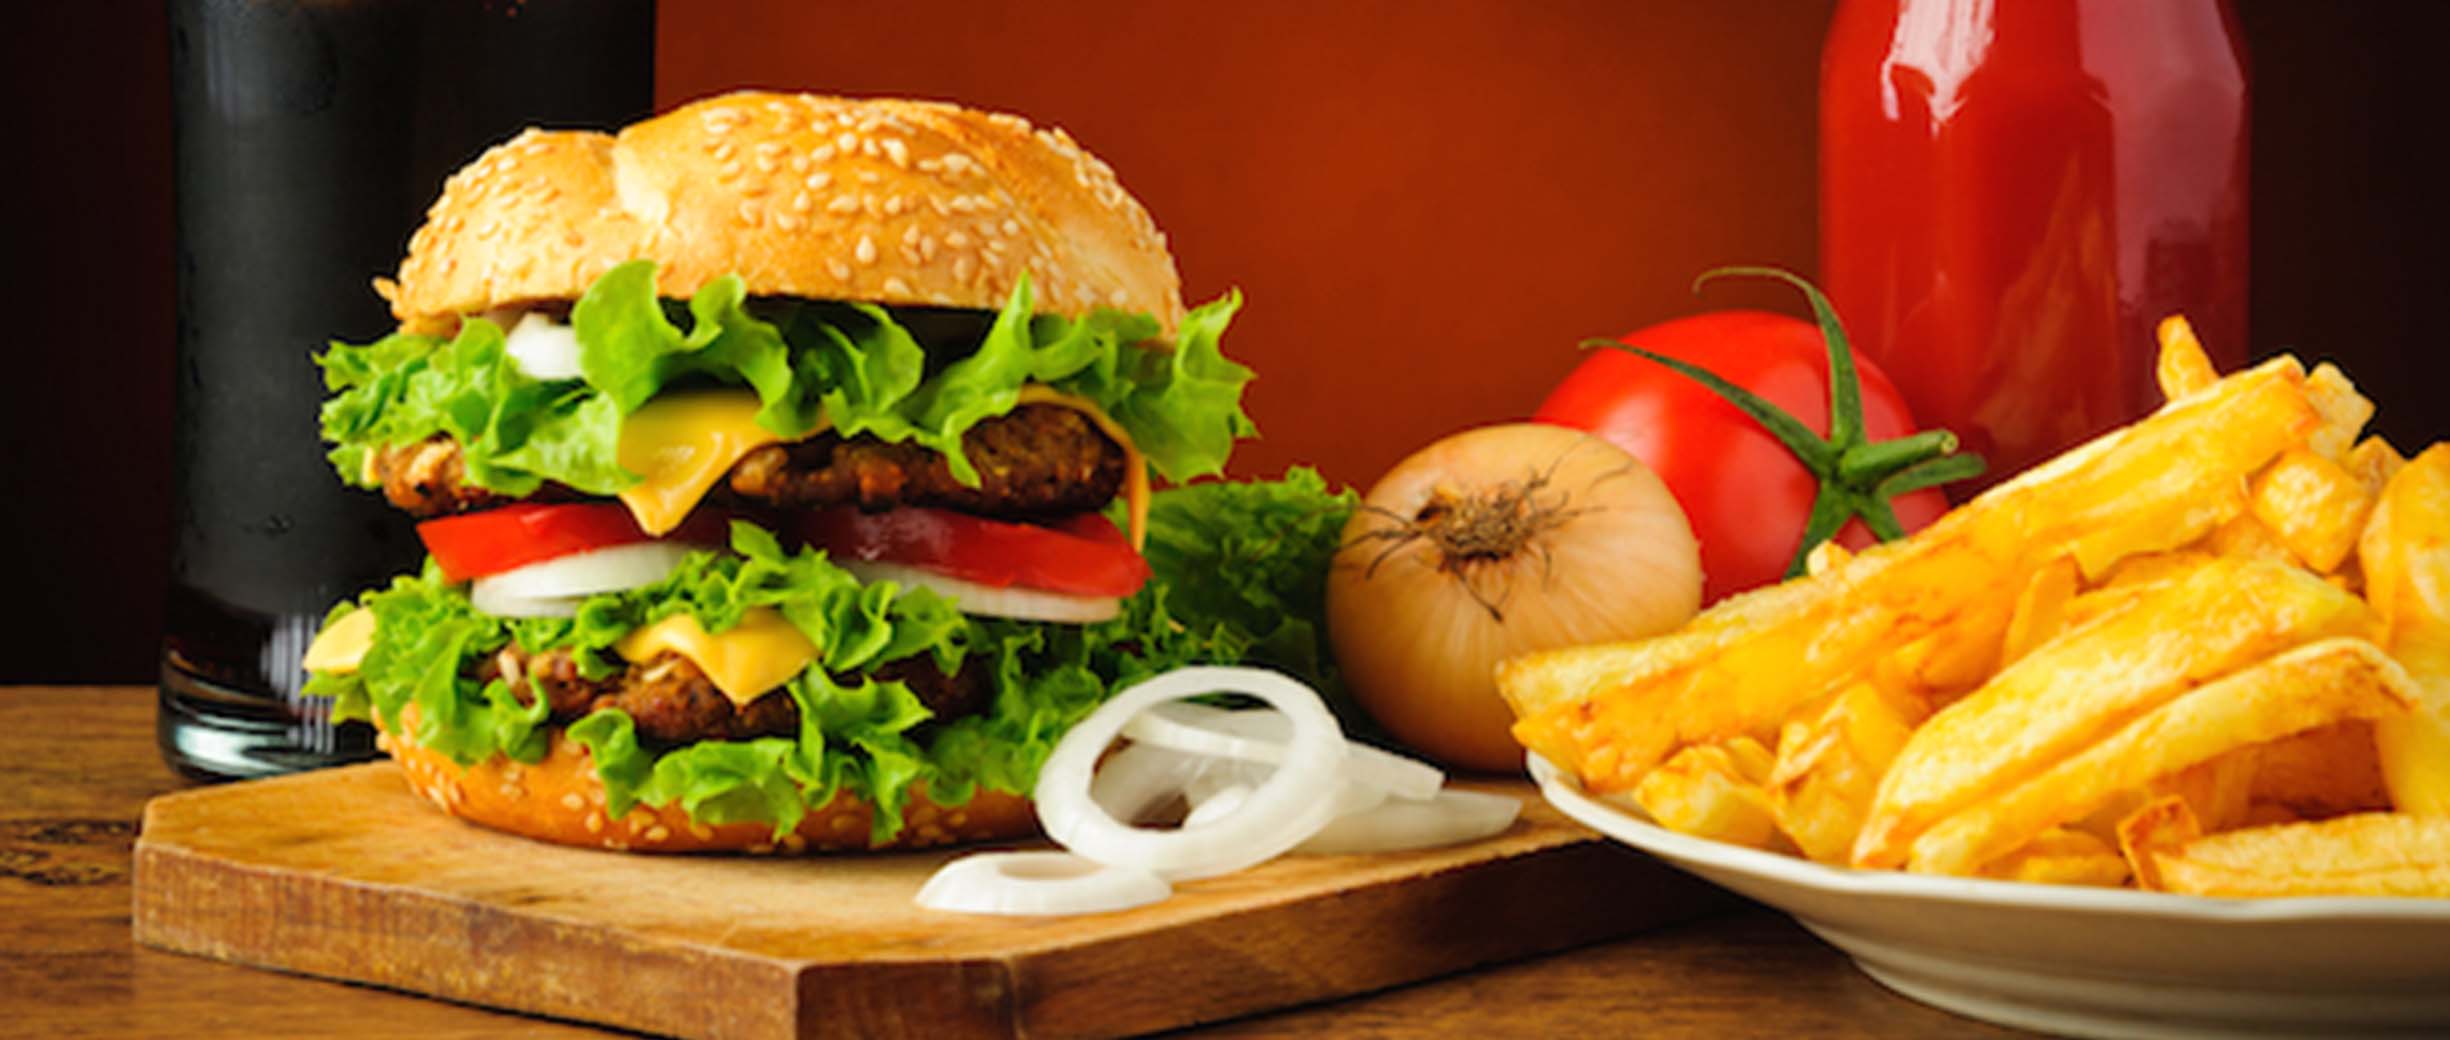 Getting Fast Food? Our Tips & Quiz Will Help You Make Healthy Choices